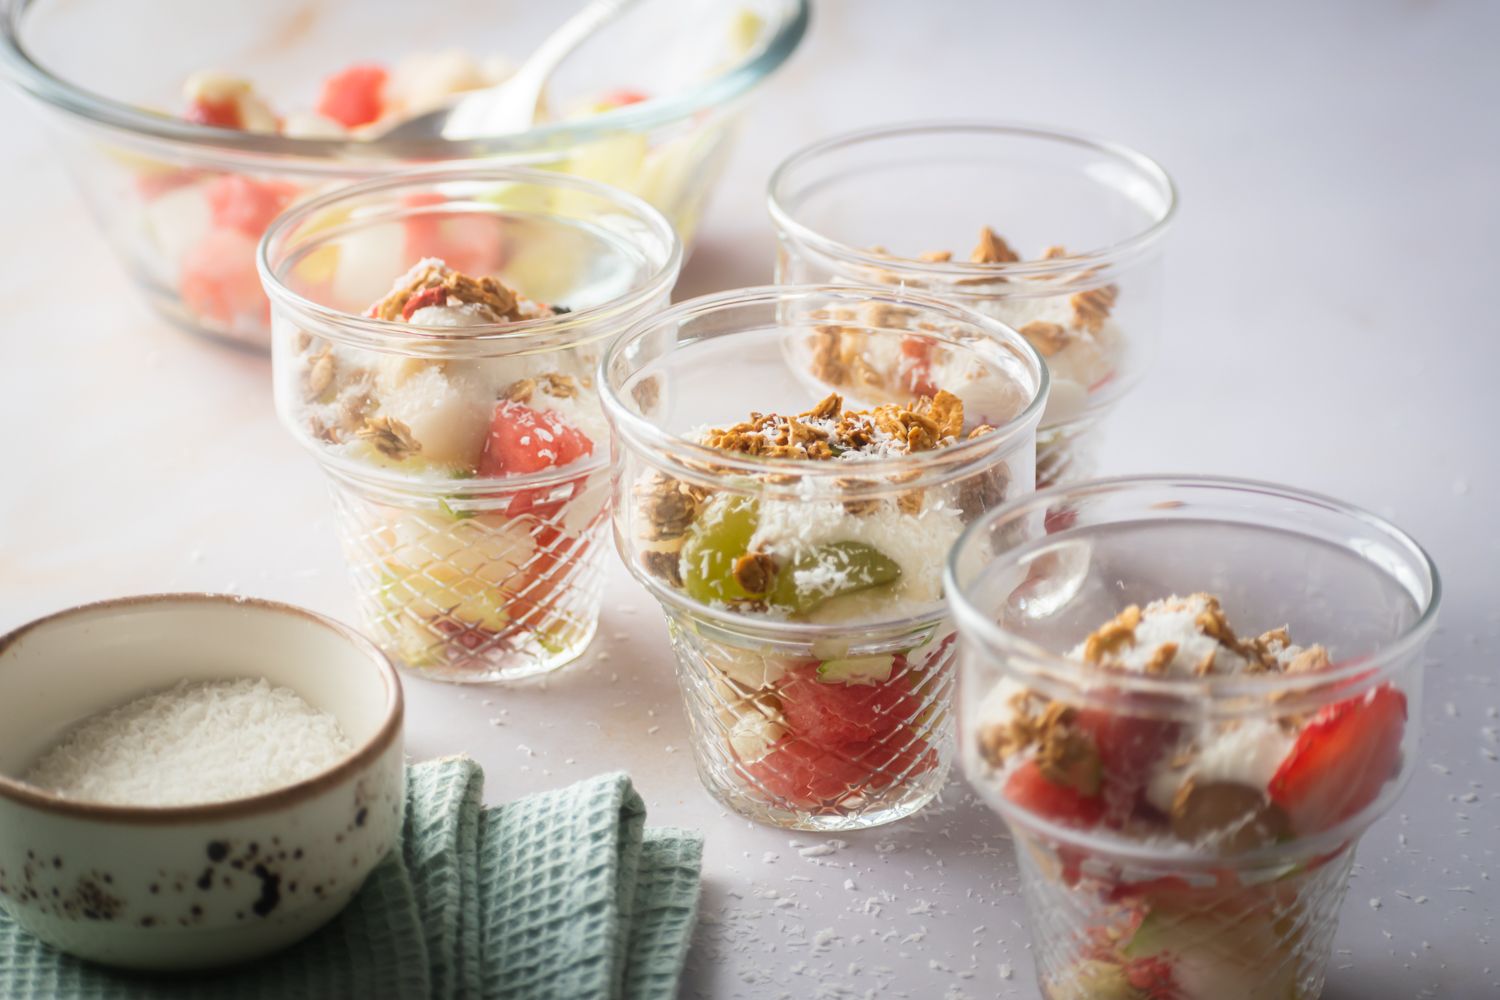 Mexican fruit salad bionico with watermelon, strawberries, grapes, and apples in a condensed milk sauce in glass cups.